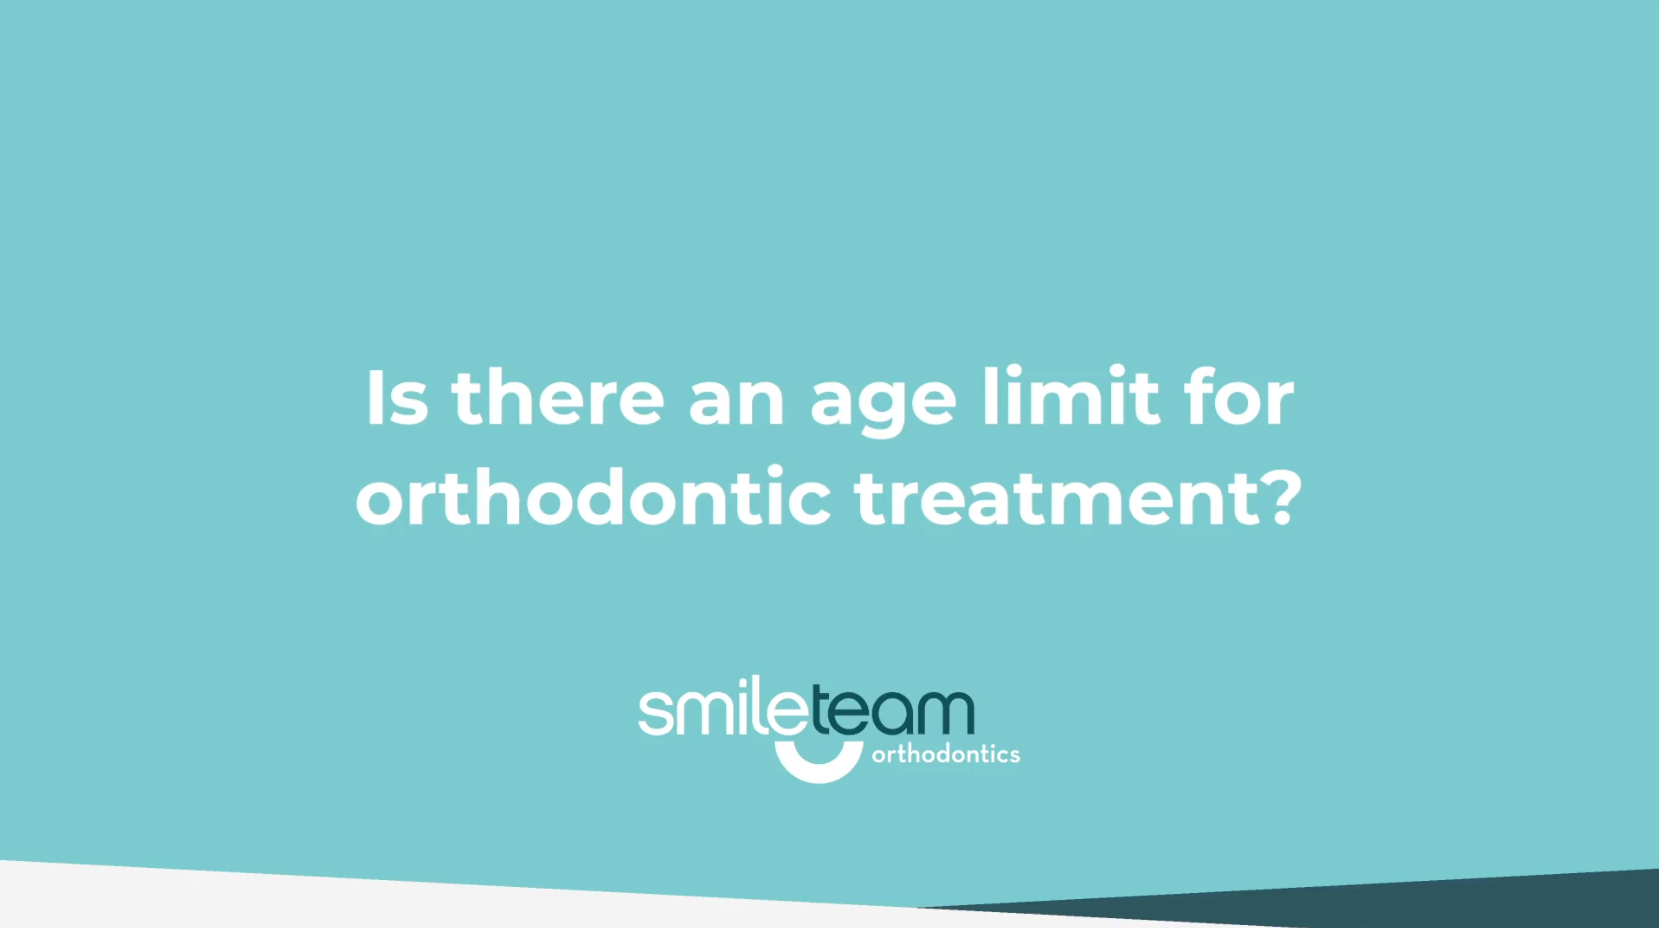 Is there an age limit for orthodontic treatment?